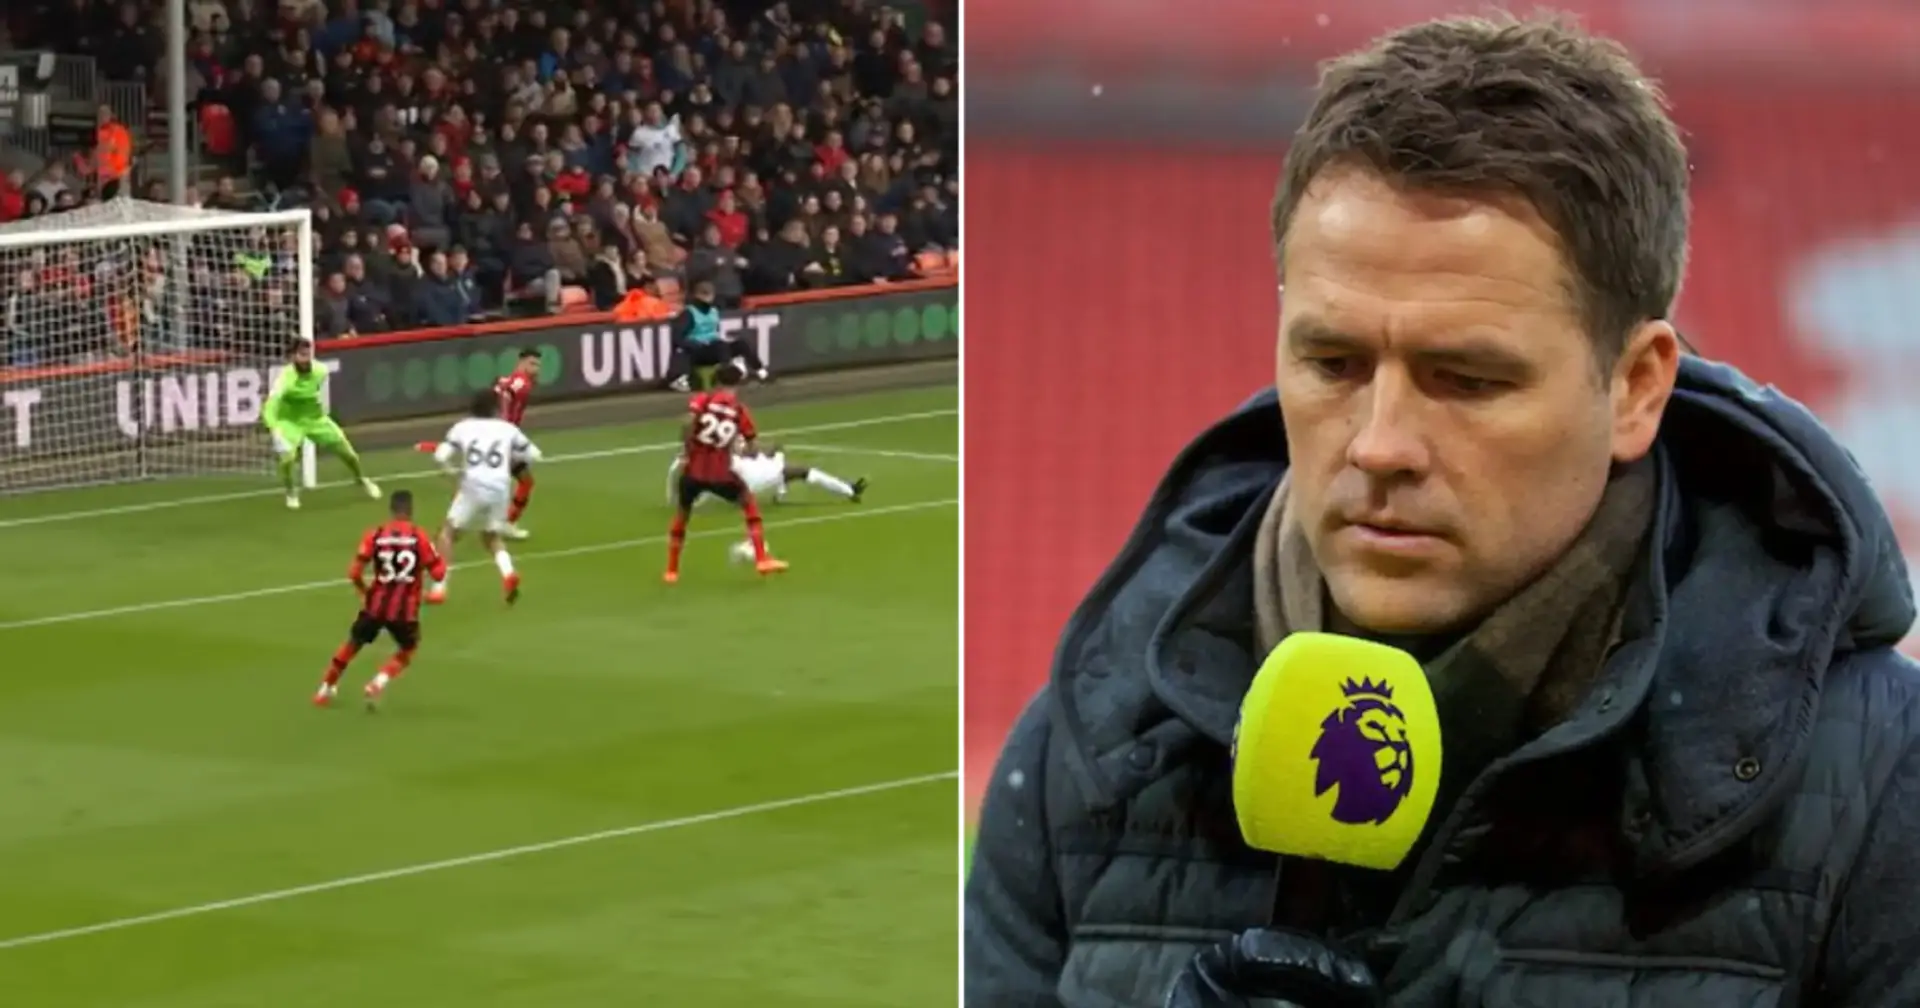 Michael Owen names 3 Liverpool players to blame for Bournemouth goal - not just Van Dijk